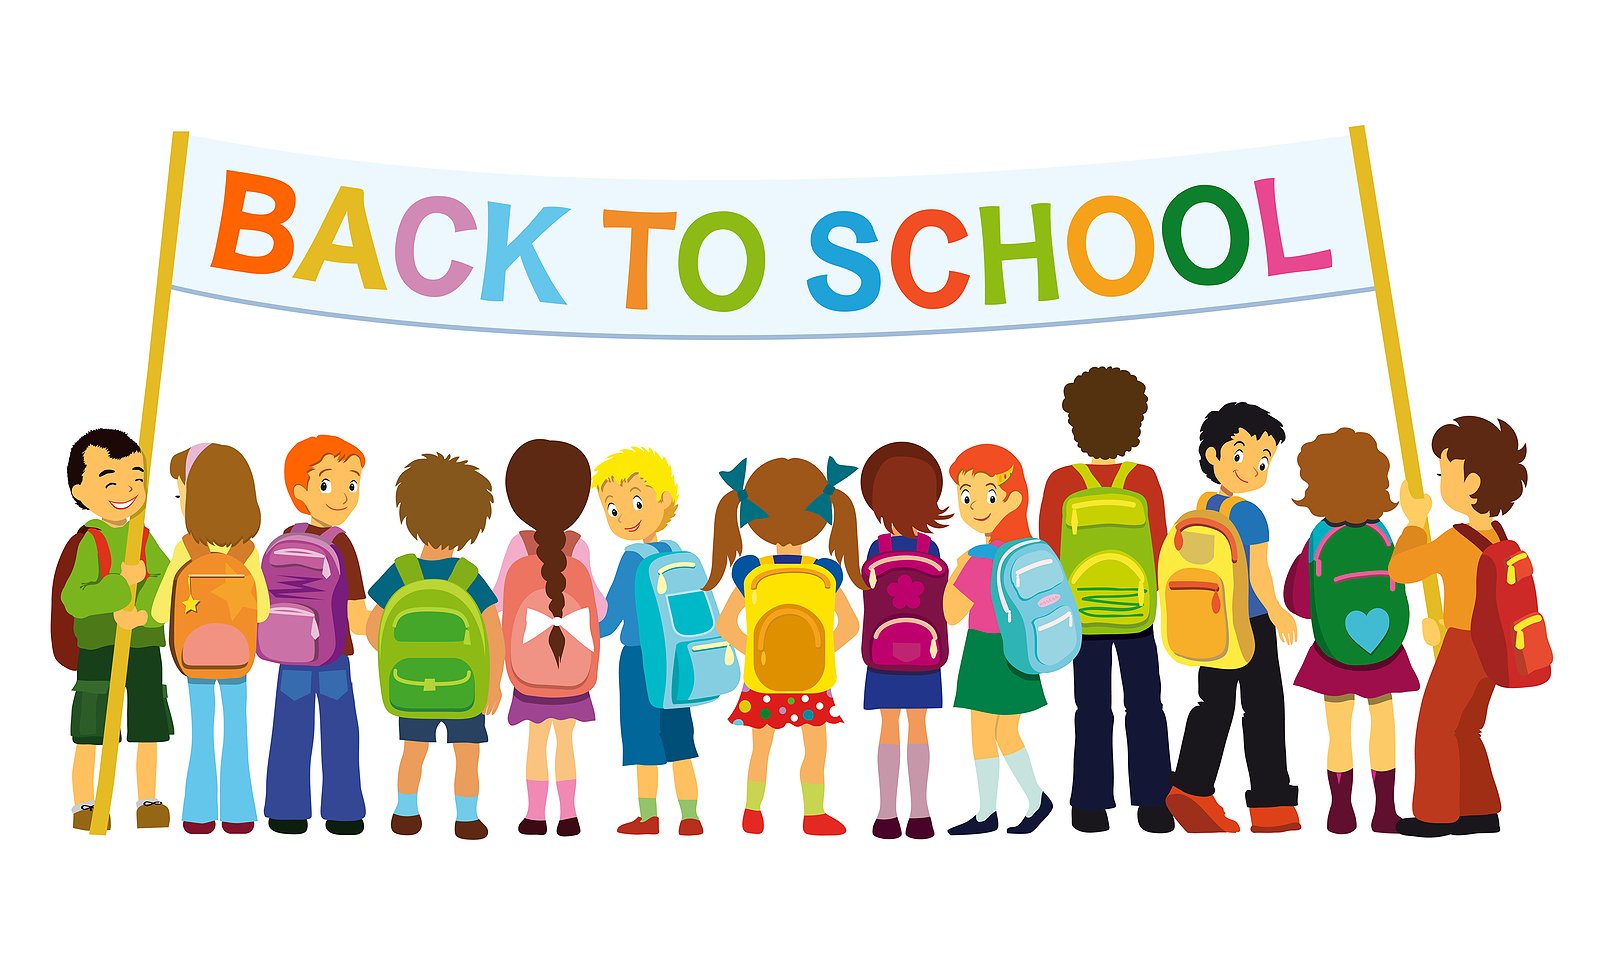 Welcome back school clipart g